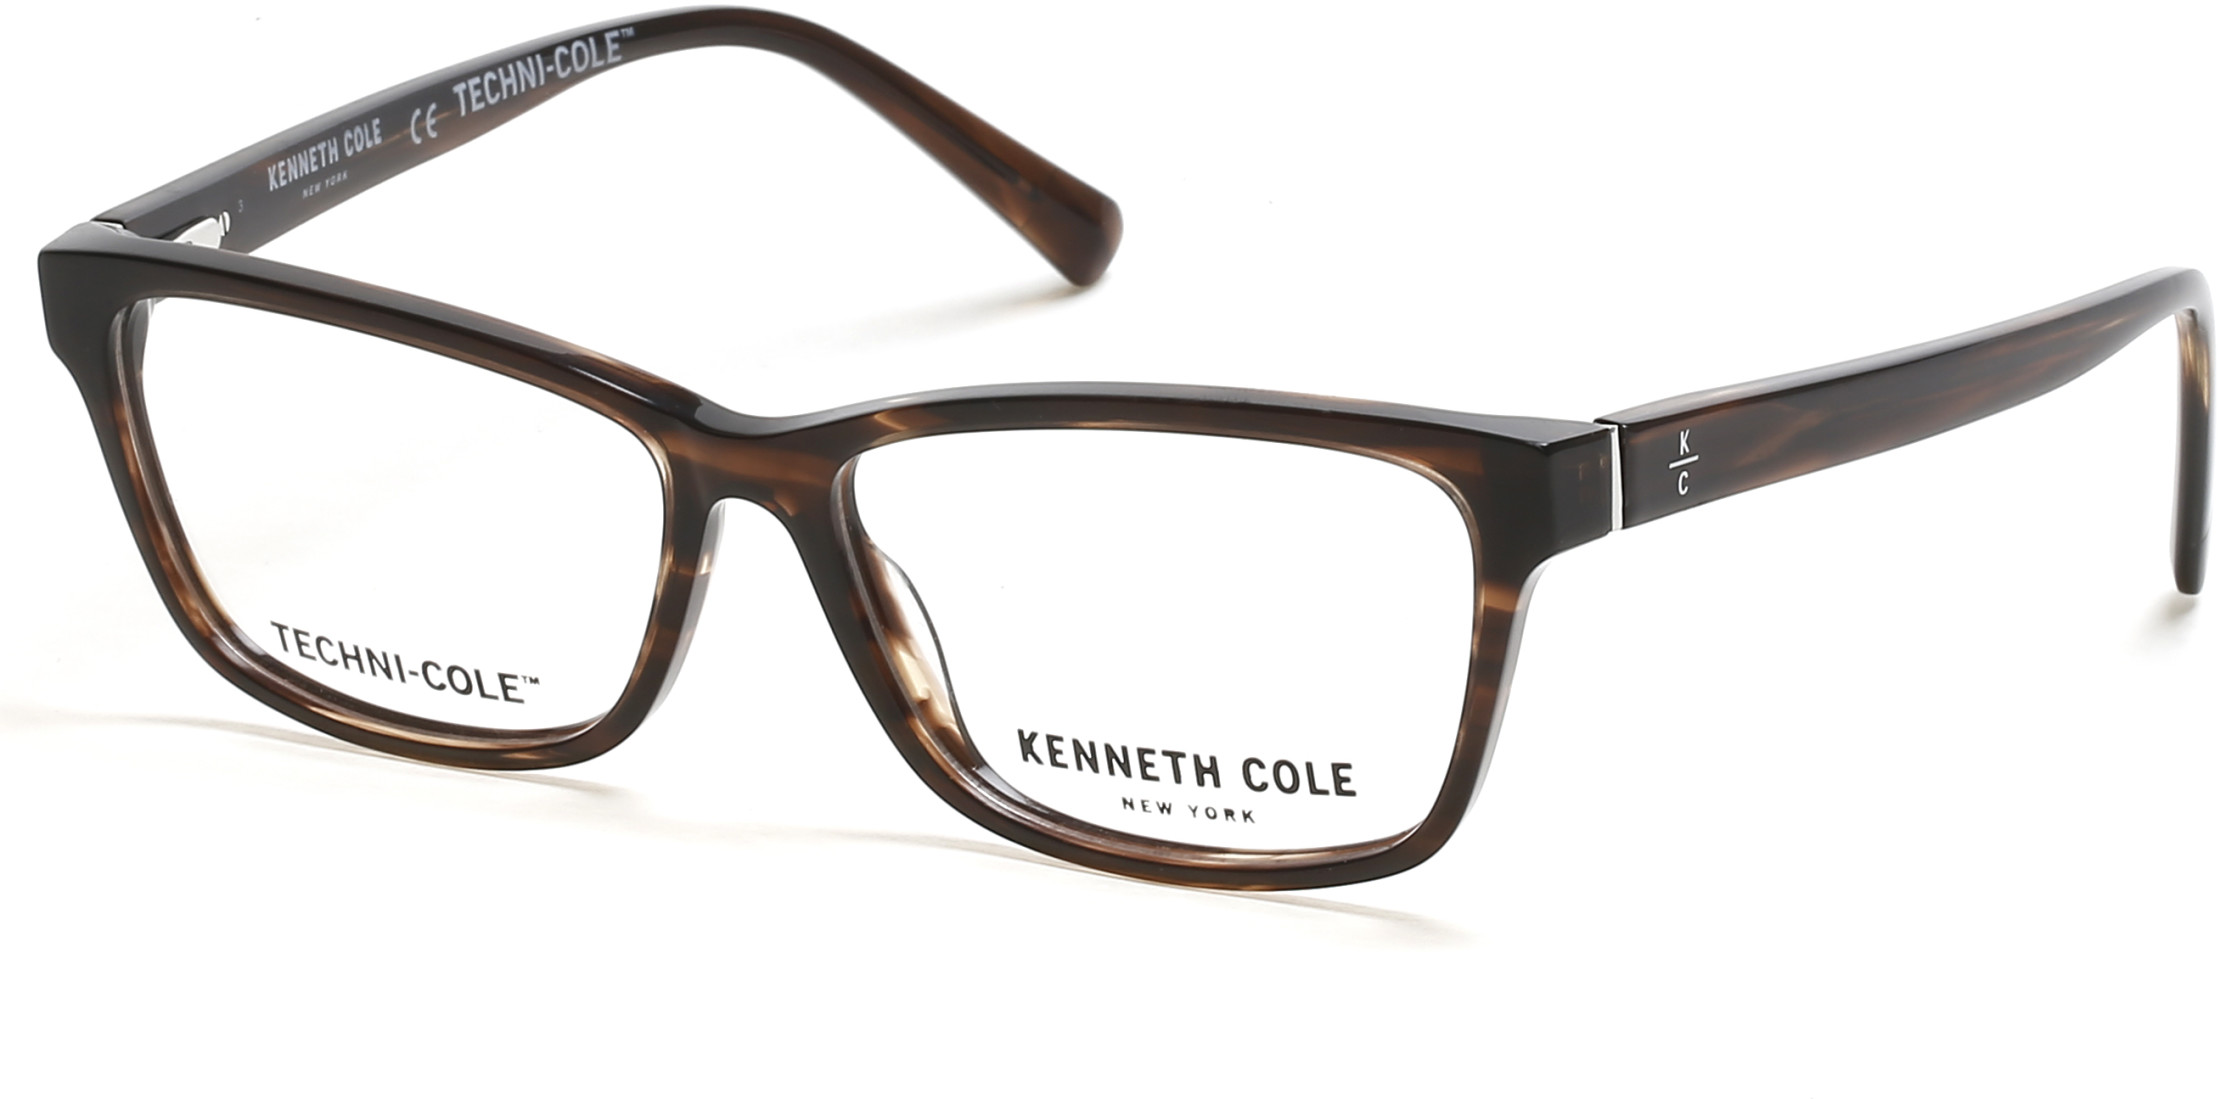 KENNETH COLE NY 0333